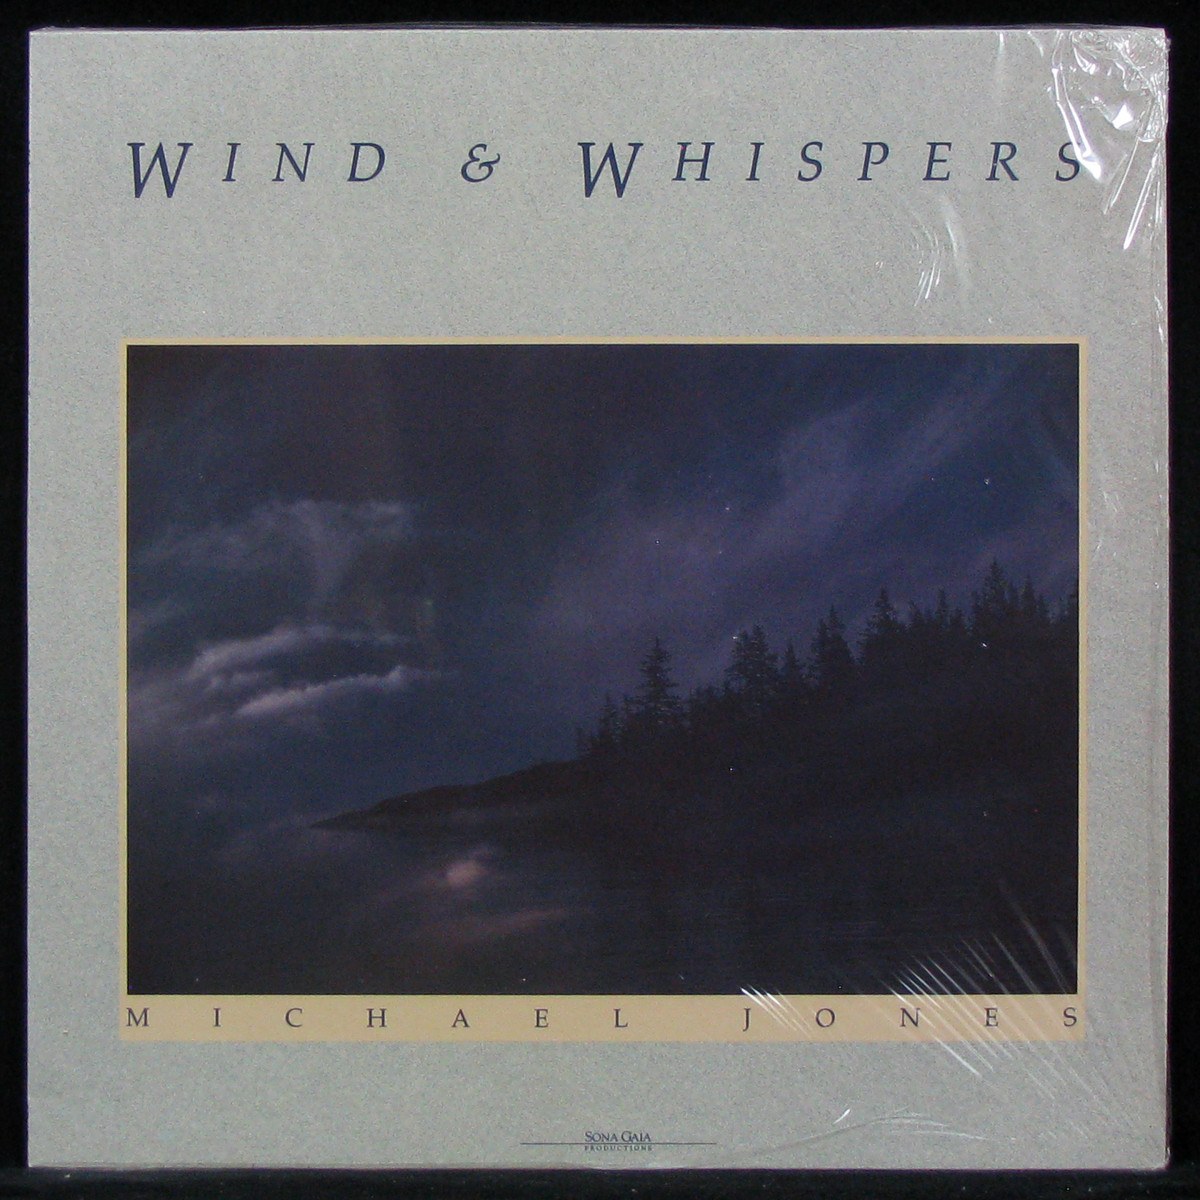 Wind & Whispers